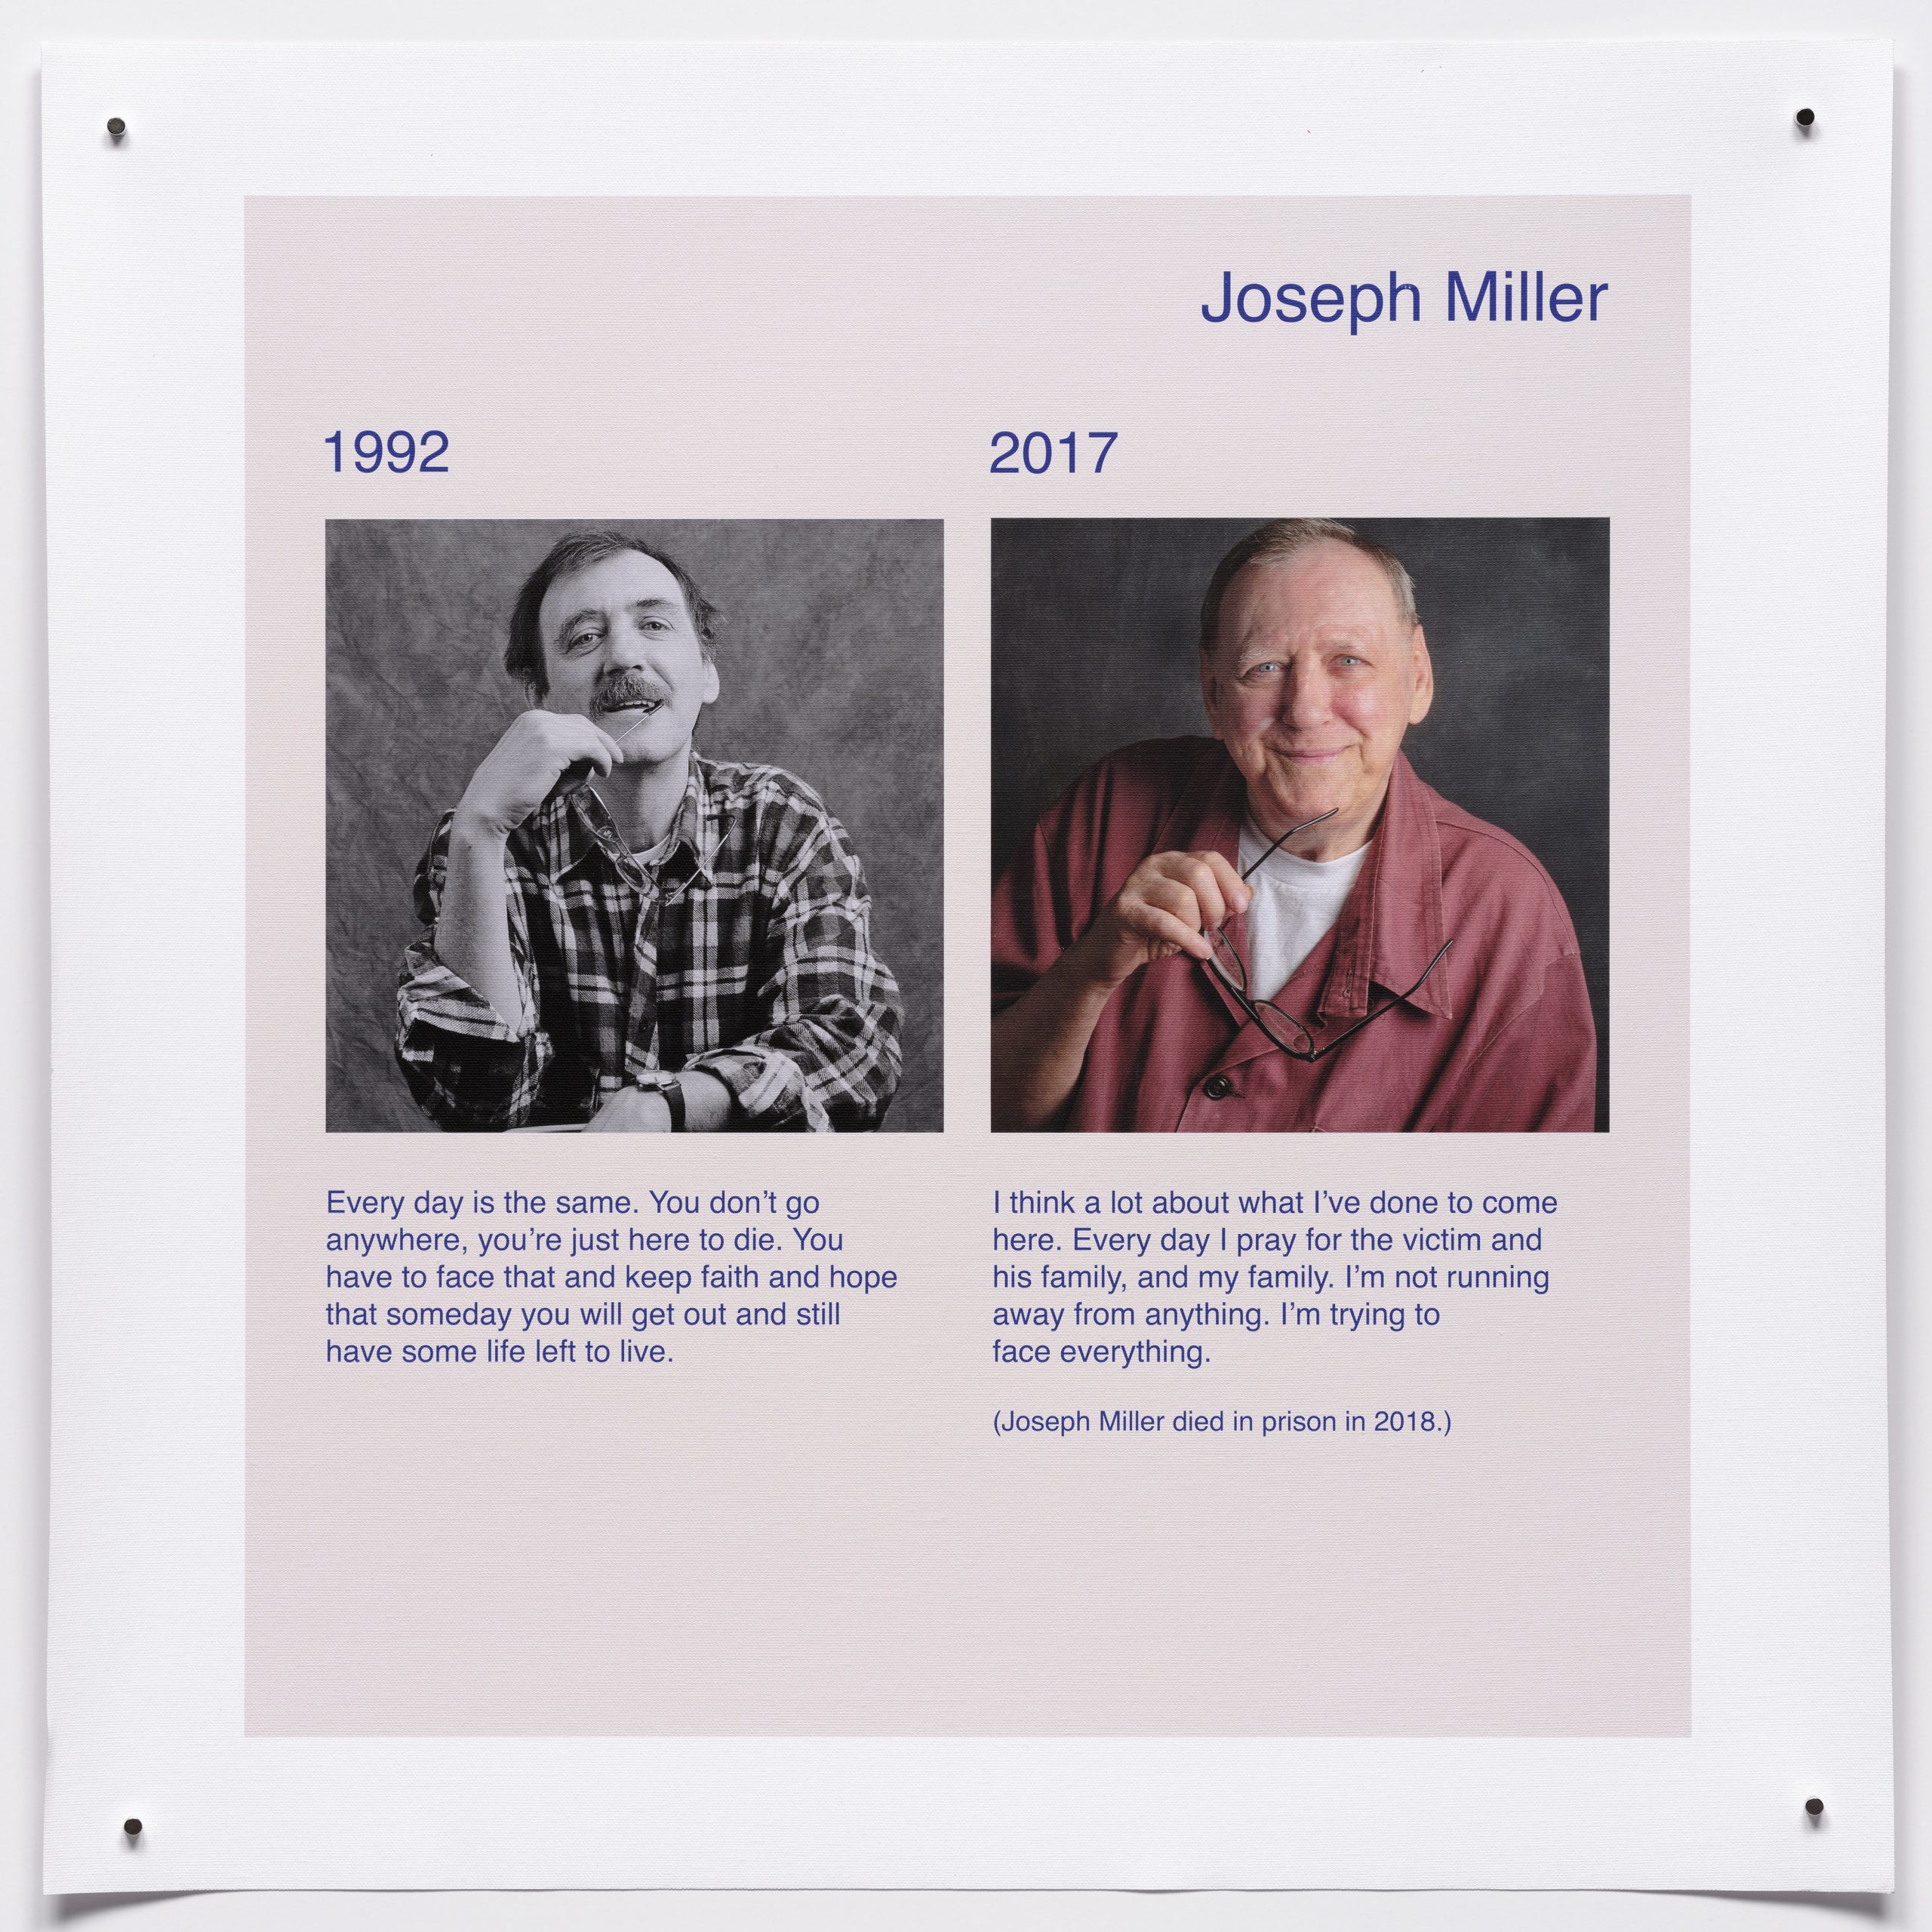 Two photographs side by side of Joseph Miller, taken in 1992 and 2017, one in black and white and the other in color. Miller is white and in both photos he is smiling. Text statements appear beneath each photo.